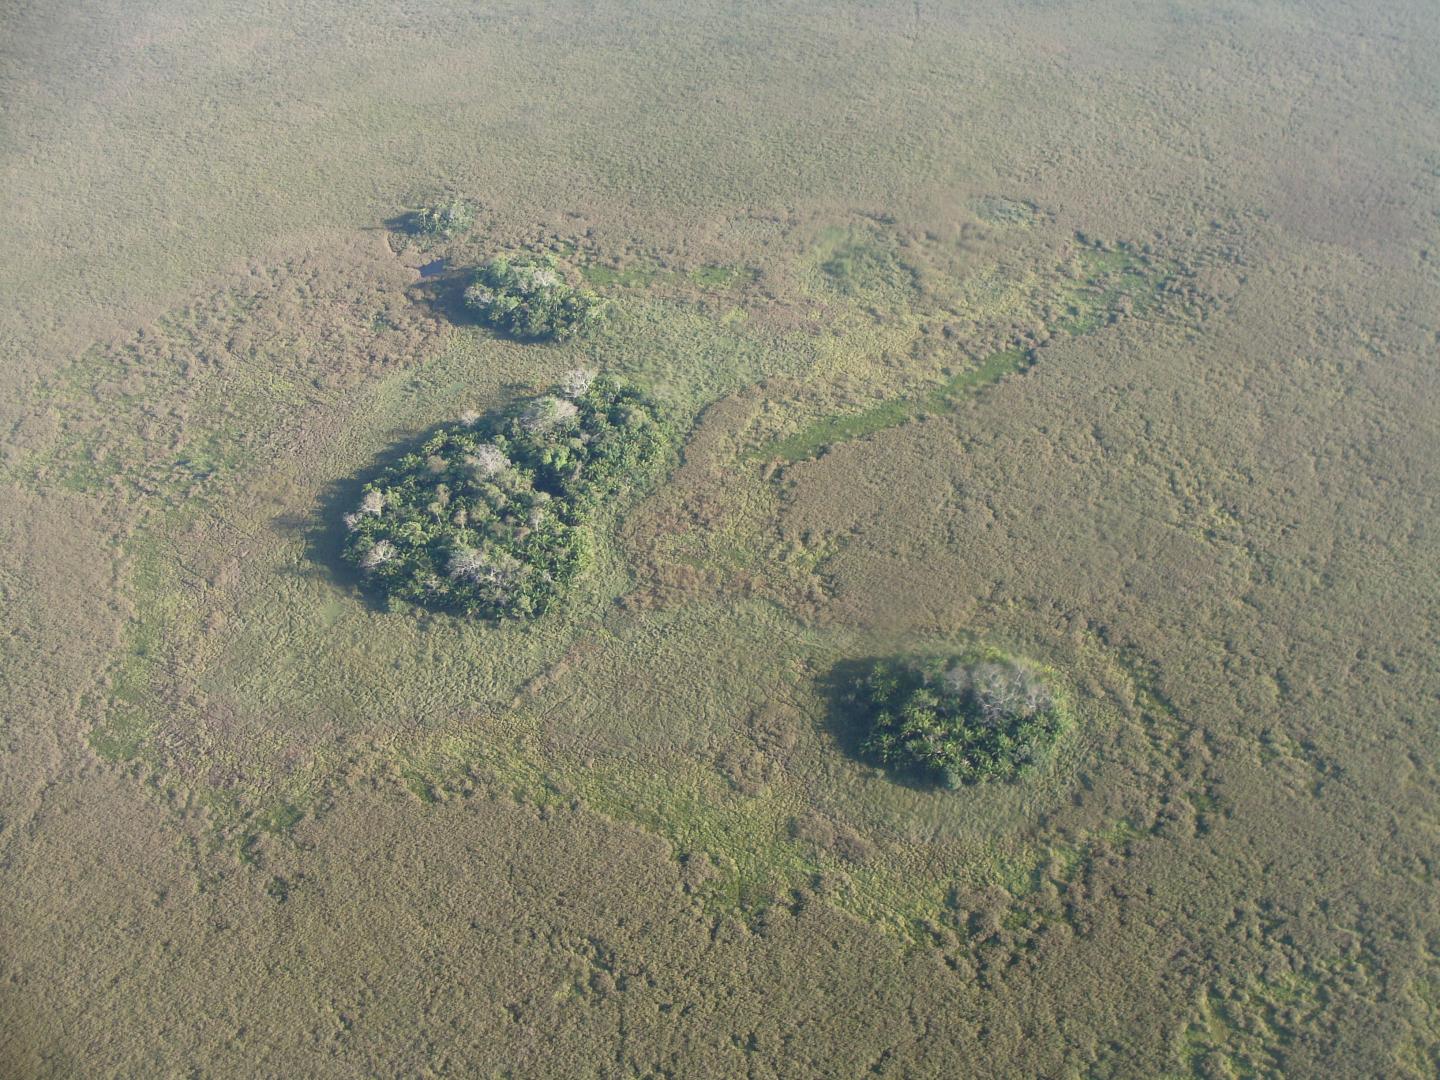 Forest Islands Seen from Above